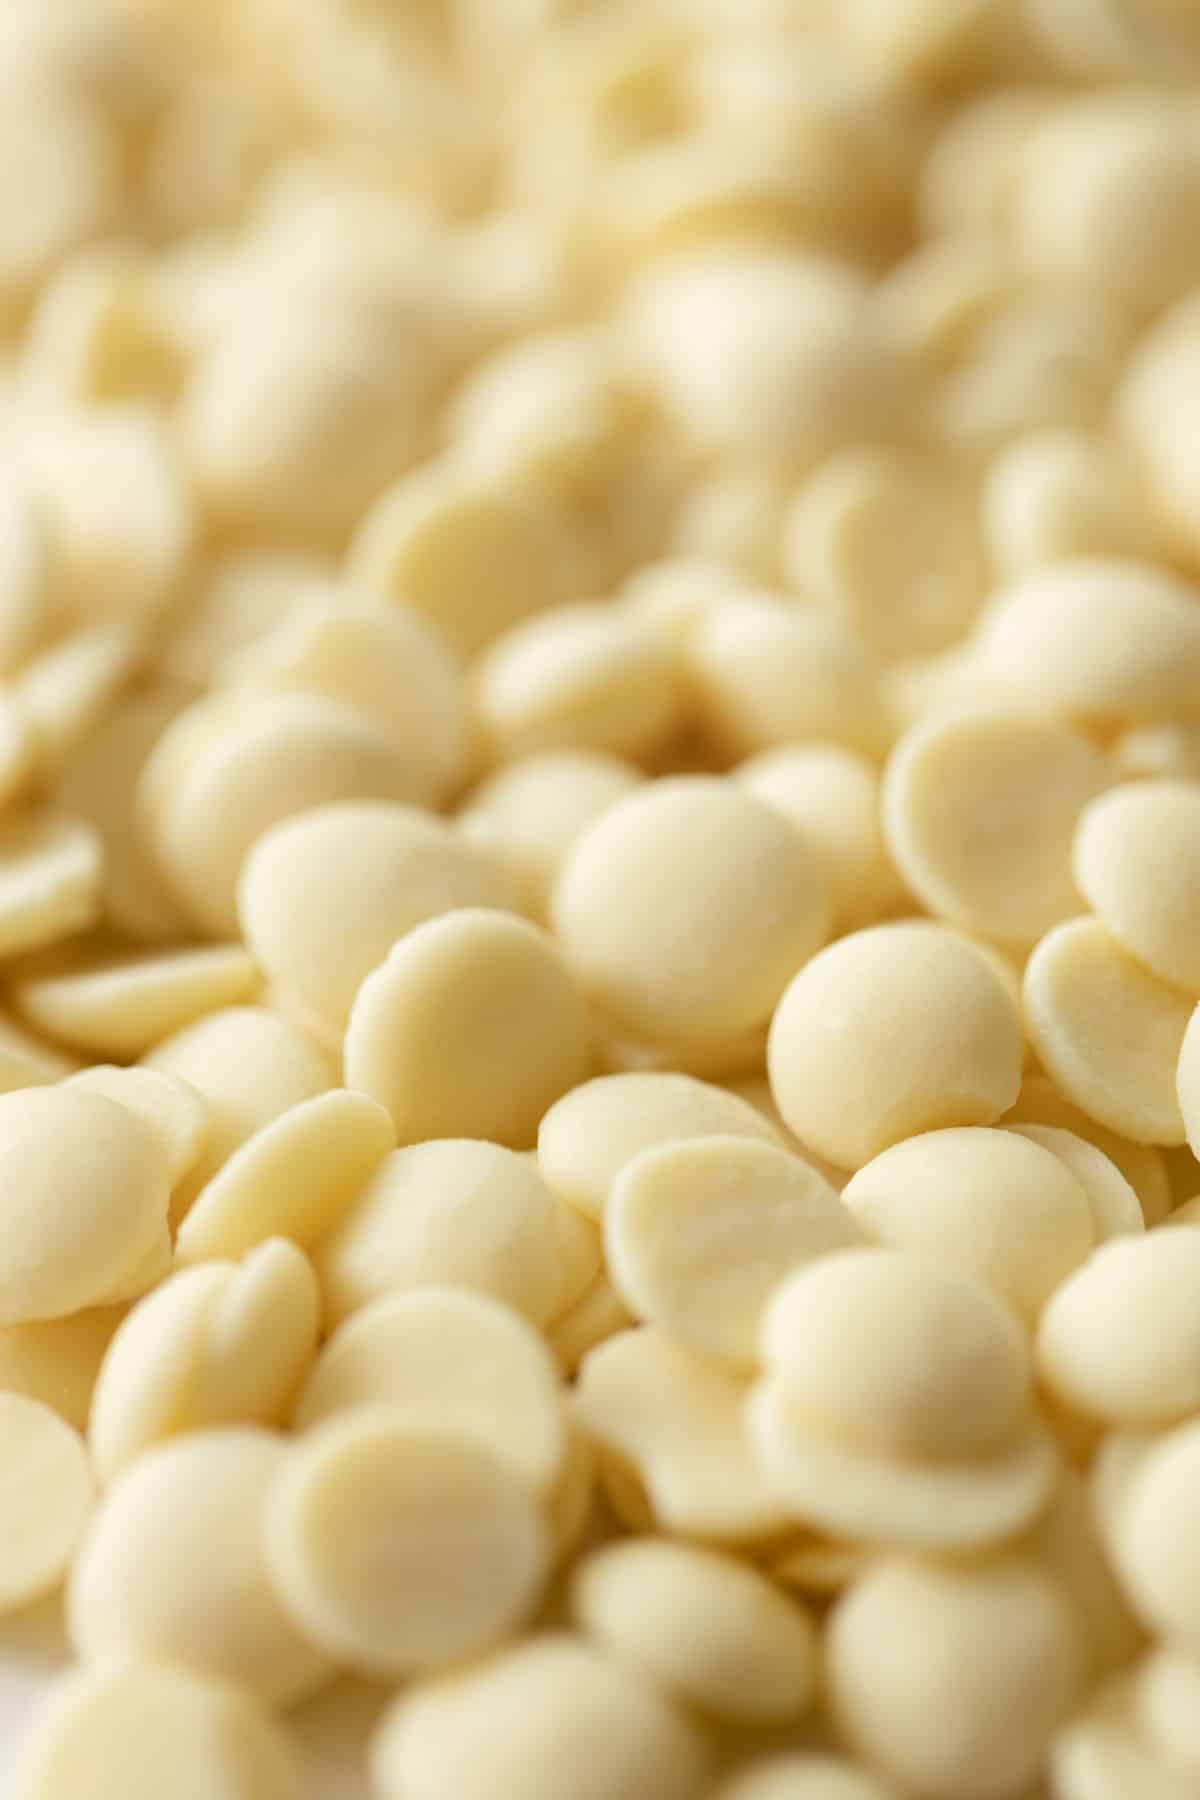 A close up of white chocolate chips.